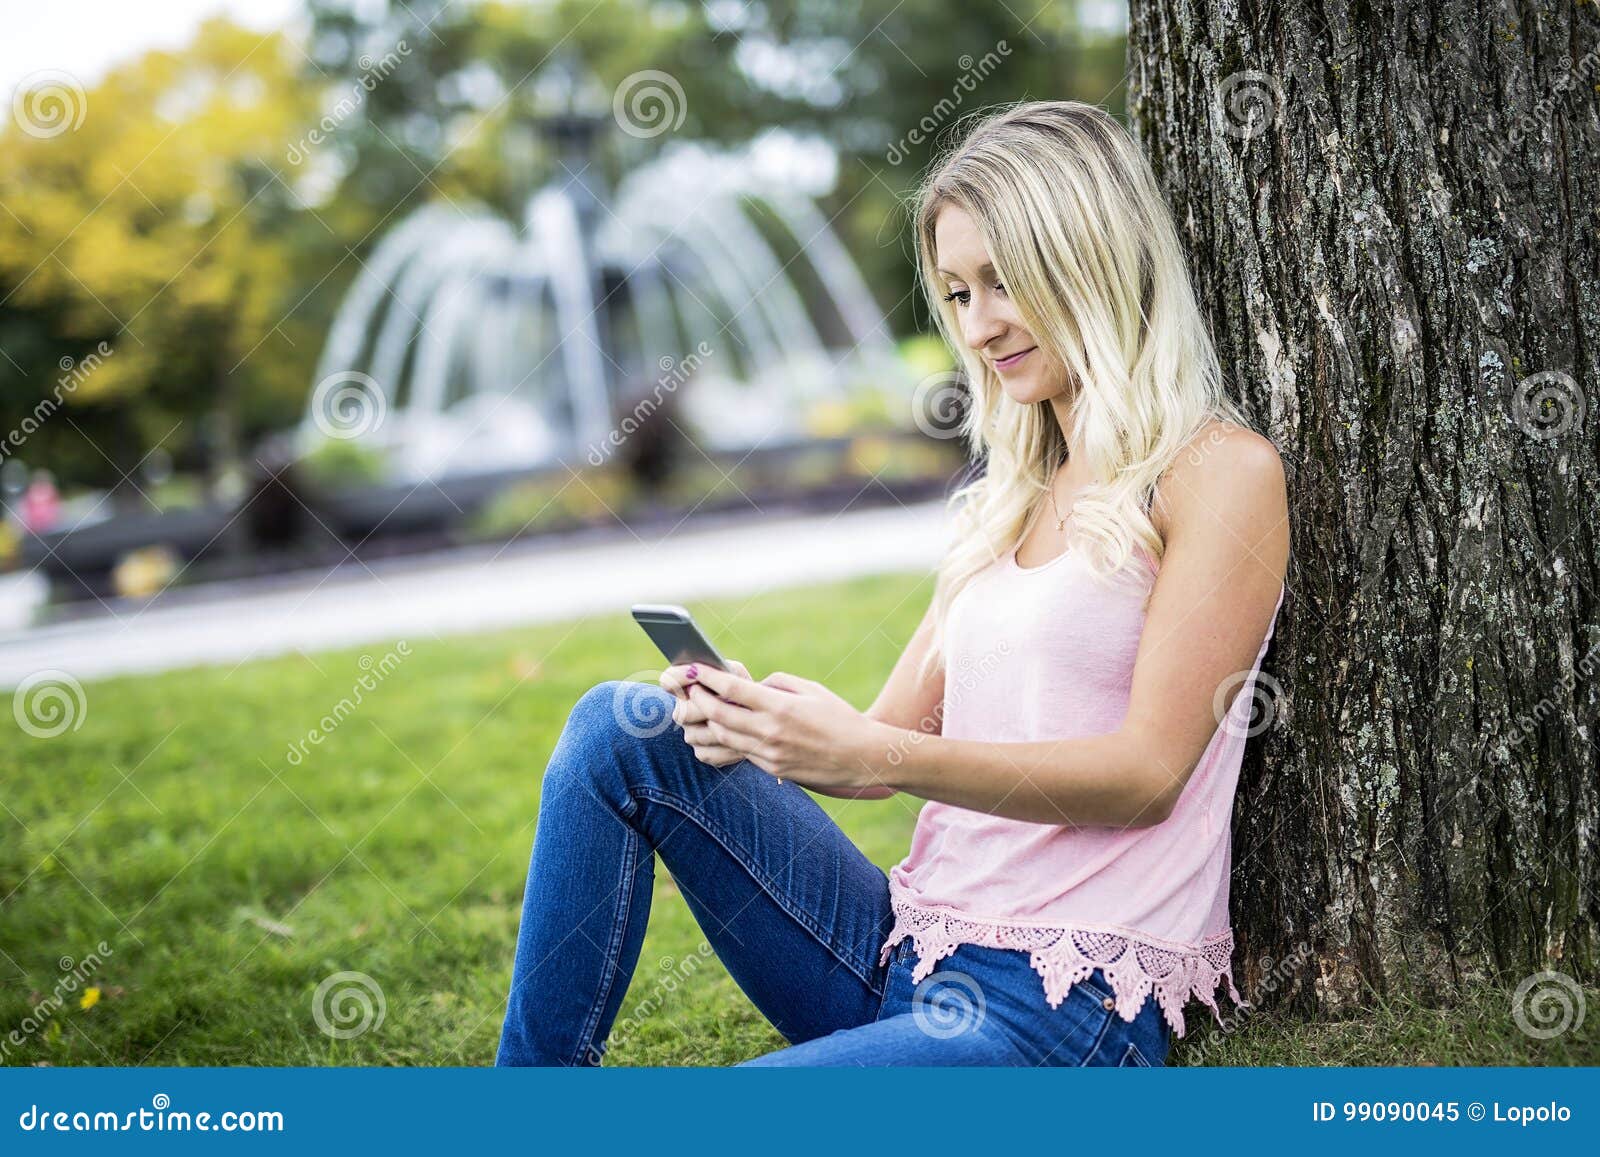 happy woman posing against a tree